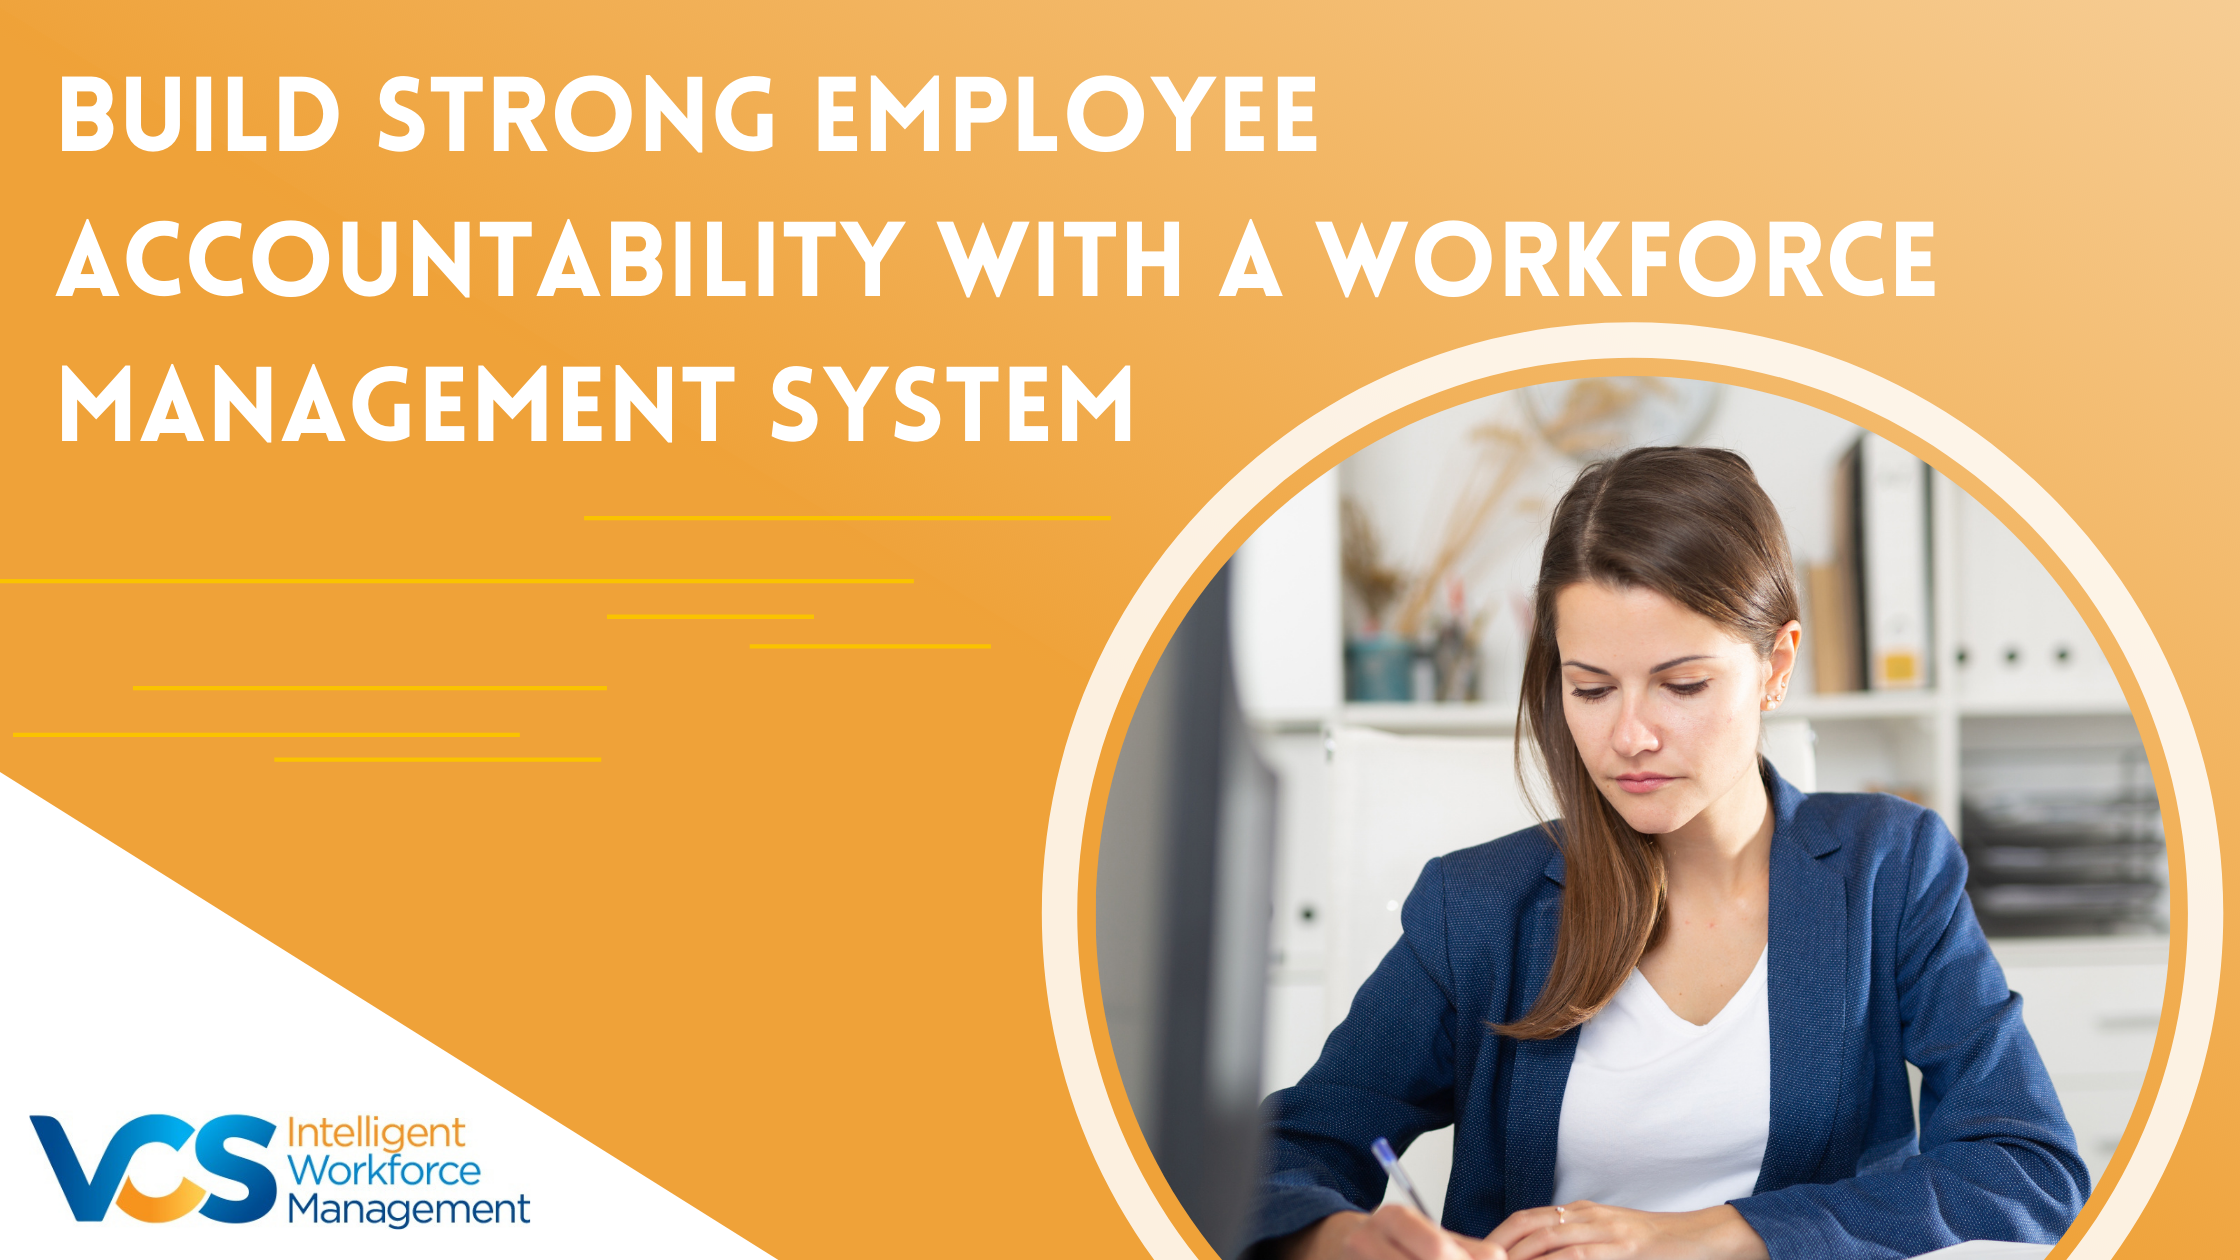 Build Strong Employee Accountability with a Workforce Management System